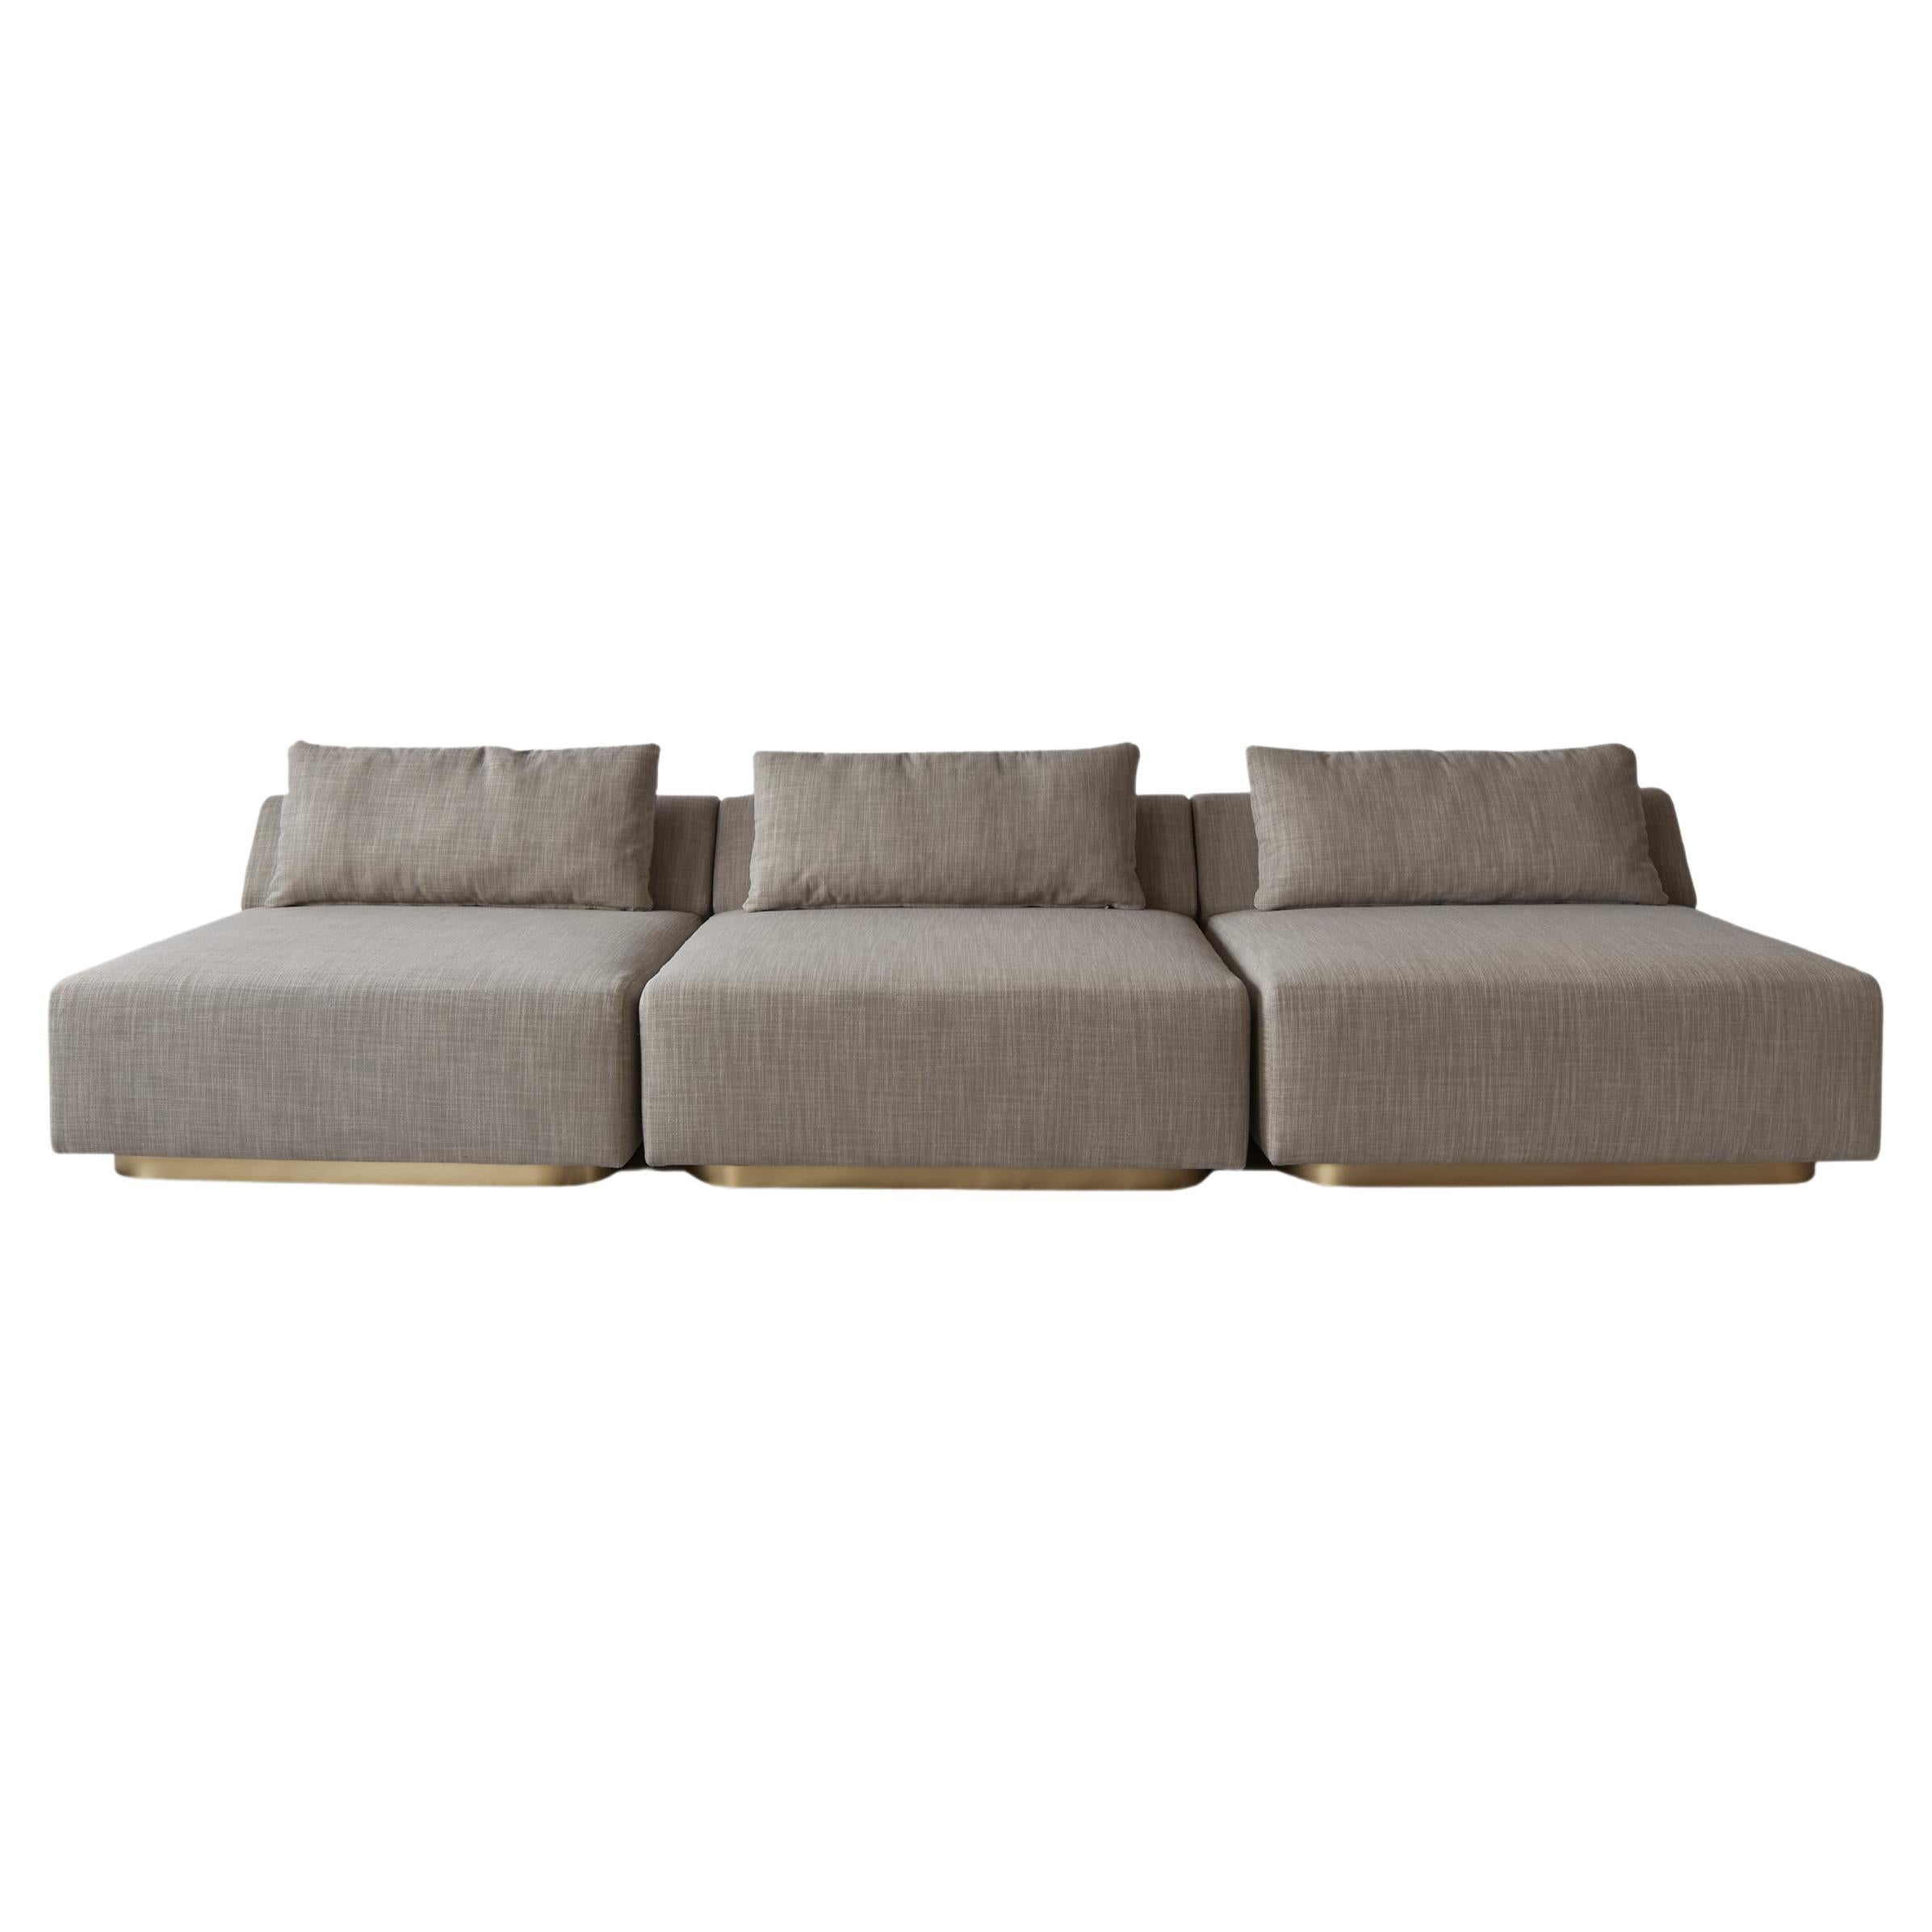 Oberon Outdoor Sectional Sofa by Atra For Sale